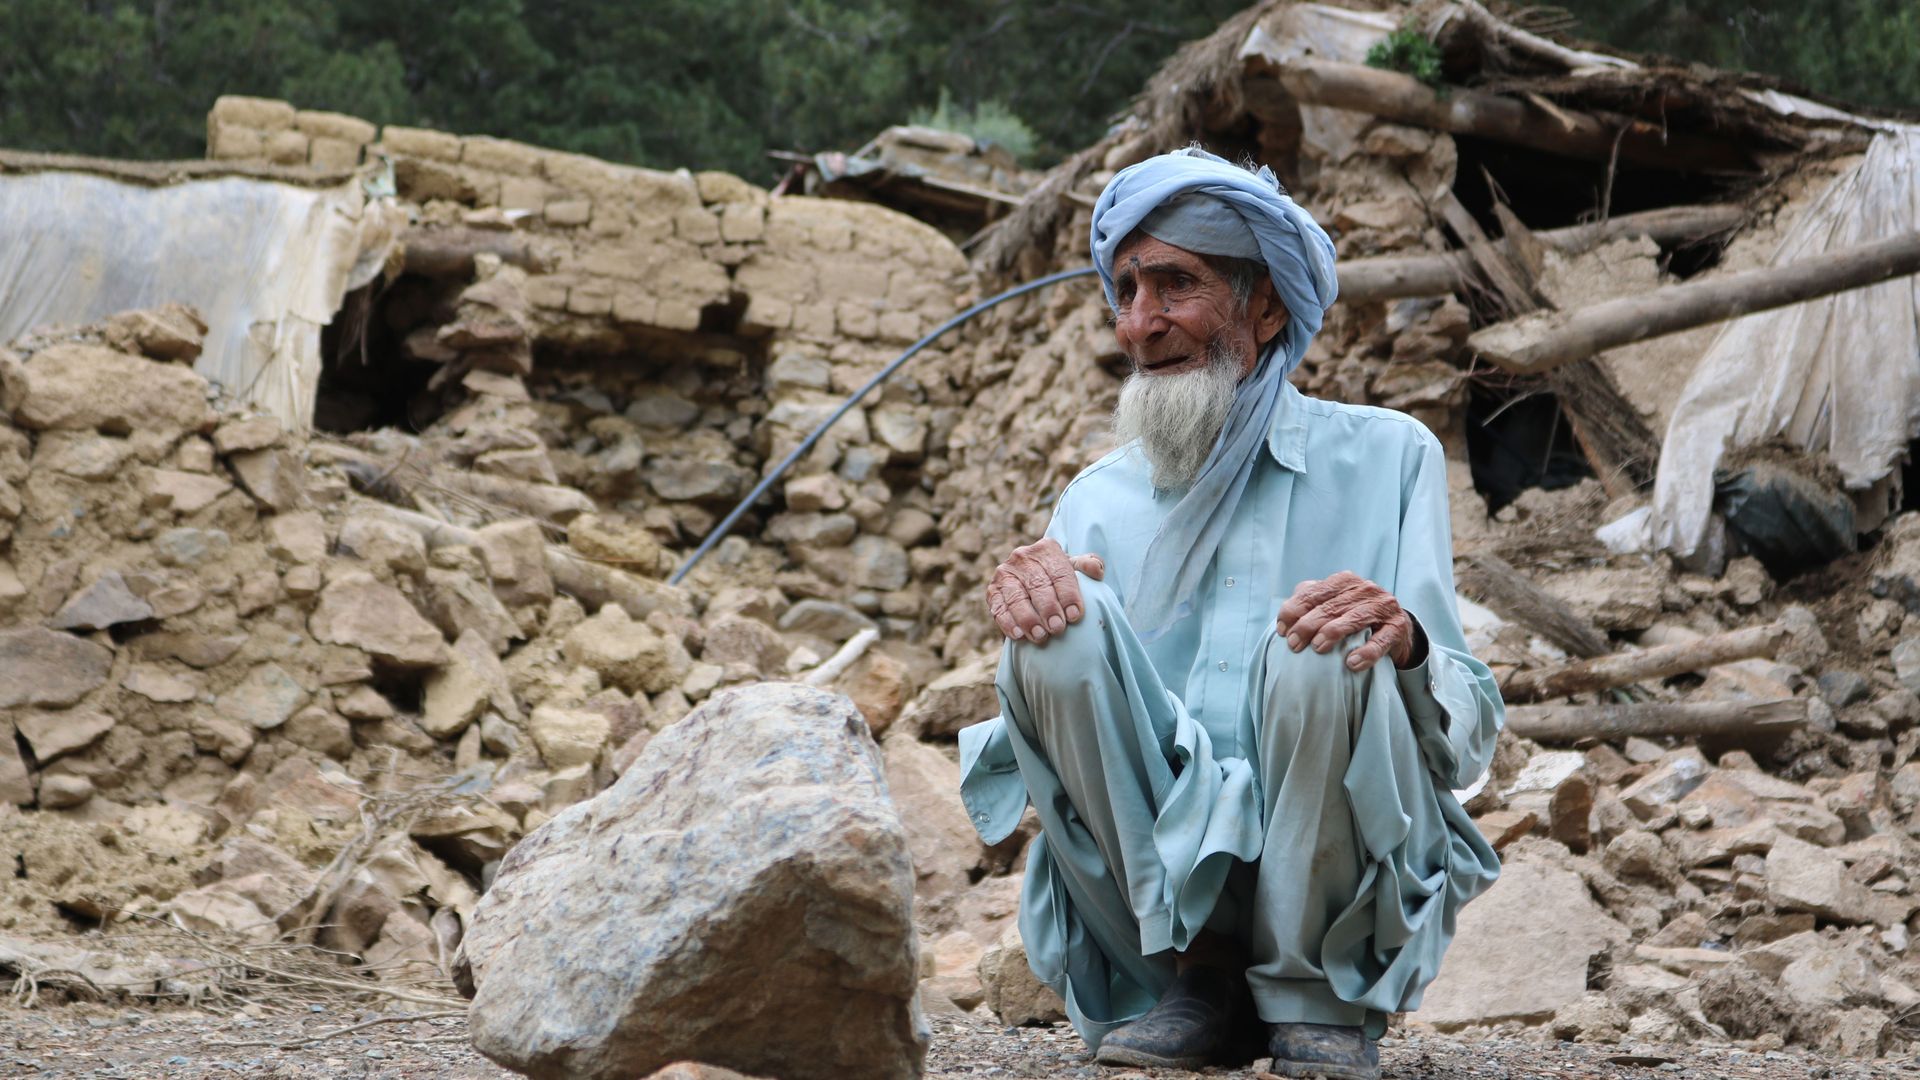 An elder reacts to the earthquake's devastation in Khost province, where hundreds of homes were destroyed. Photo: Sardar Shafaq/Anadolu Agency via Getty Images